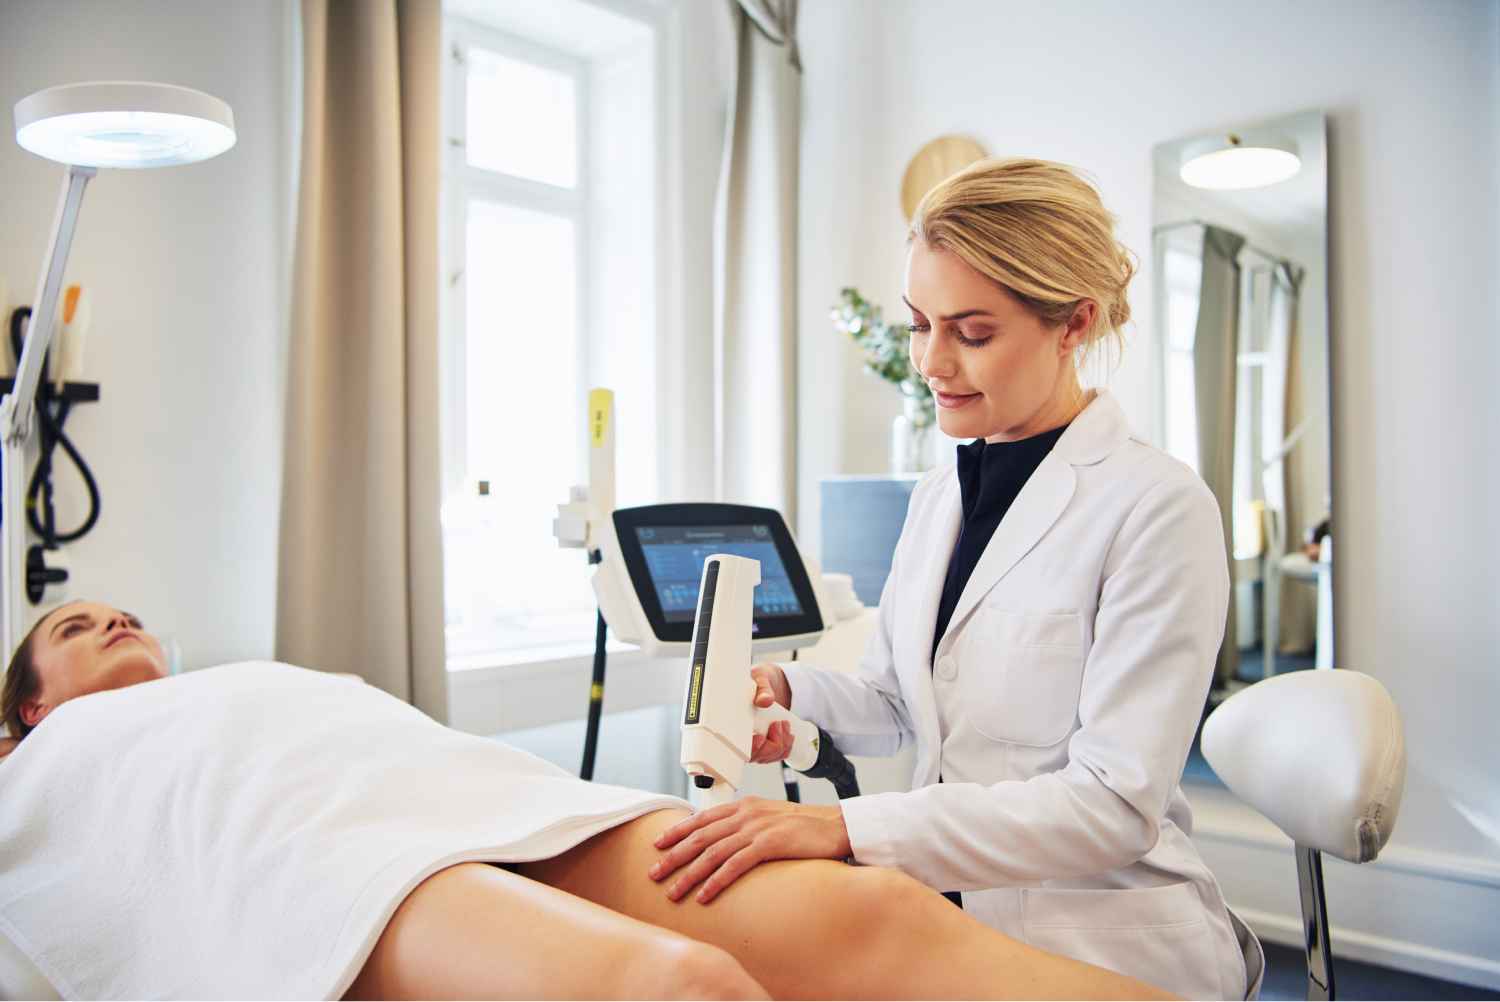 How to choose the best laser hair removal Treatment in NYC